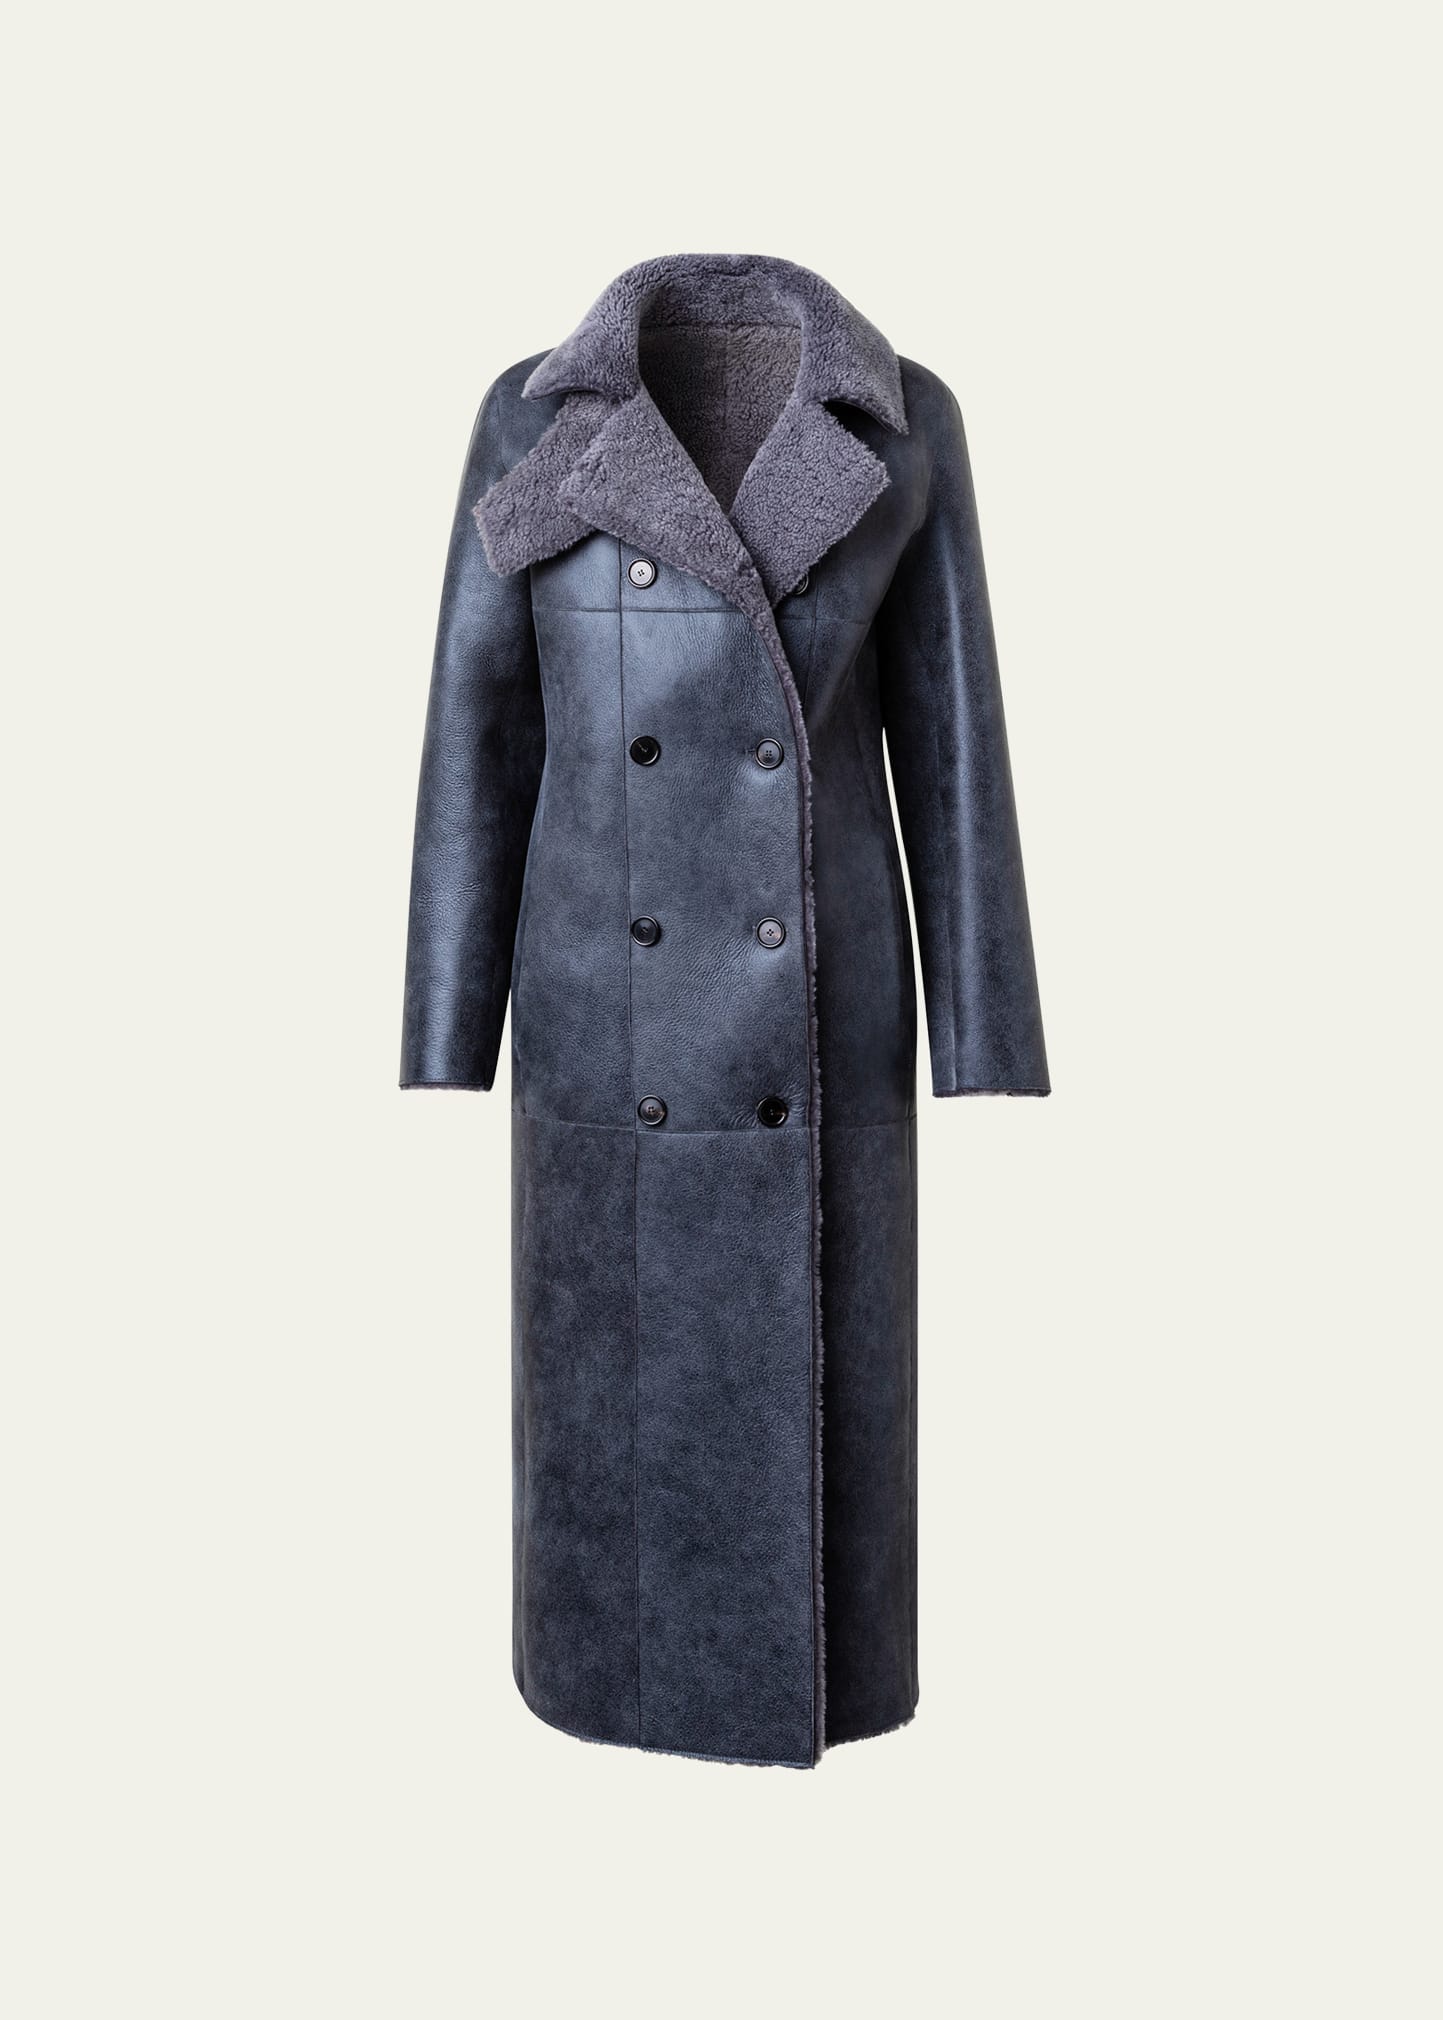 AKRIS PUNTO LEATHER SHEARLING DOUBLE-BREAST COAT